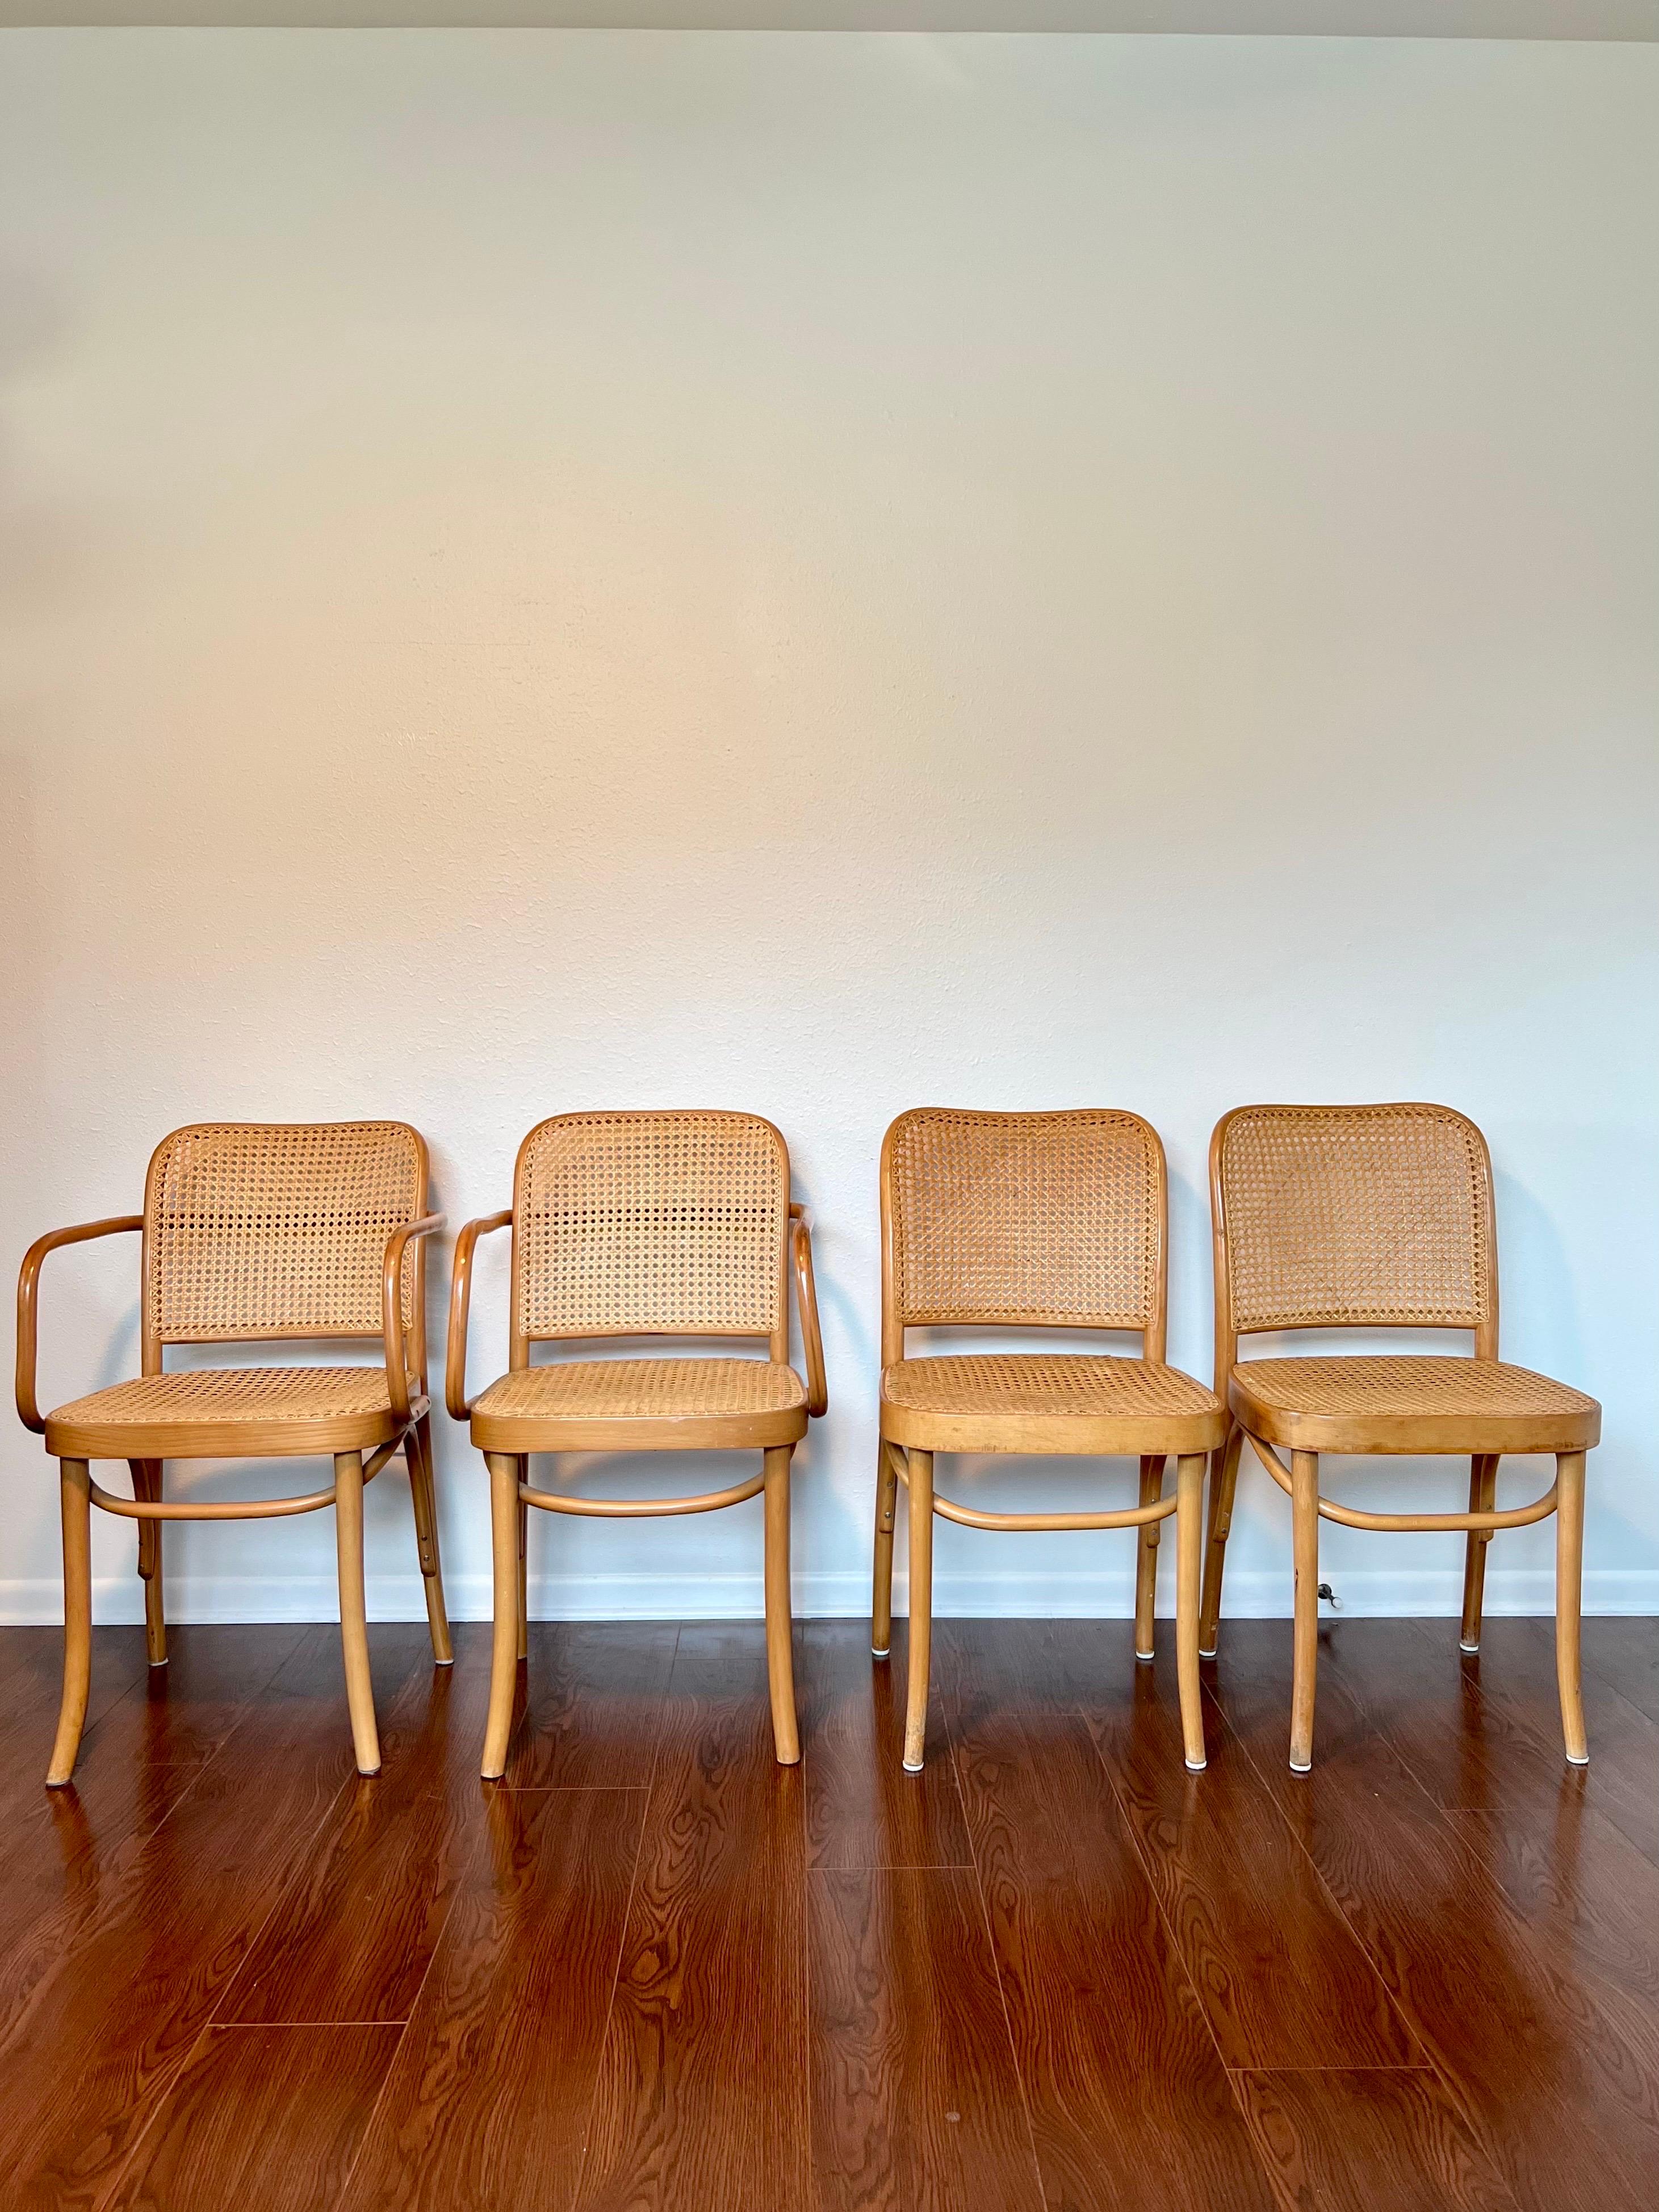 Mid-20th Century Set of 4 Josef Hoffmann Bentwood and Cane Chairs